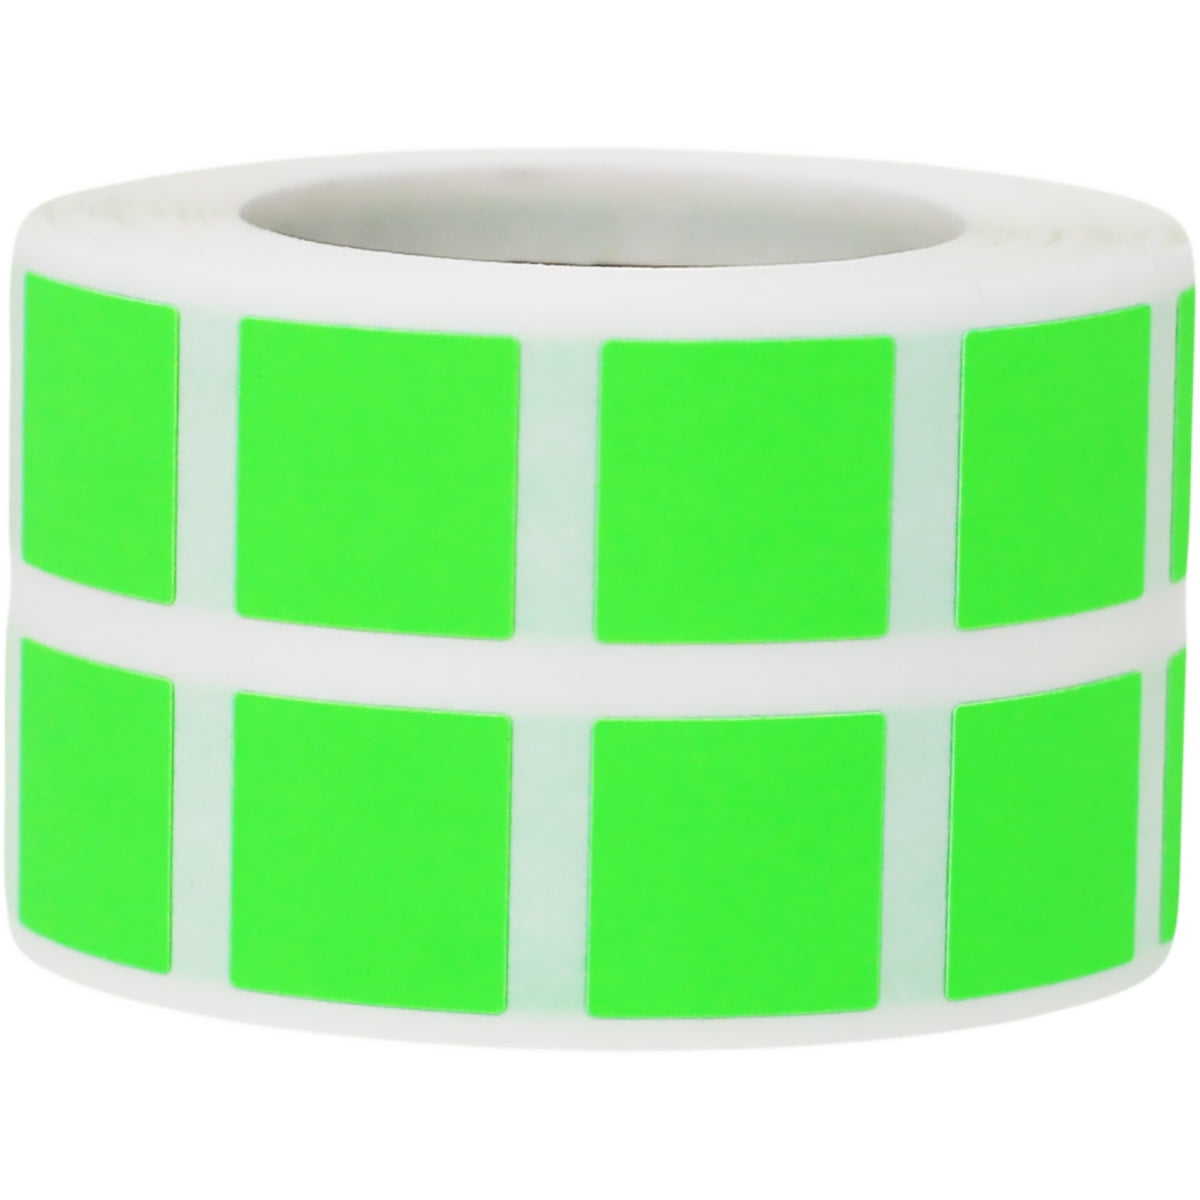 Fluorescent Green Square Stickers, 0.5 Inch Square, 1000 Labels on a ...